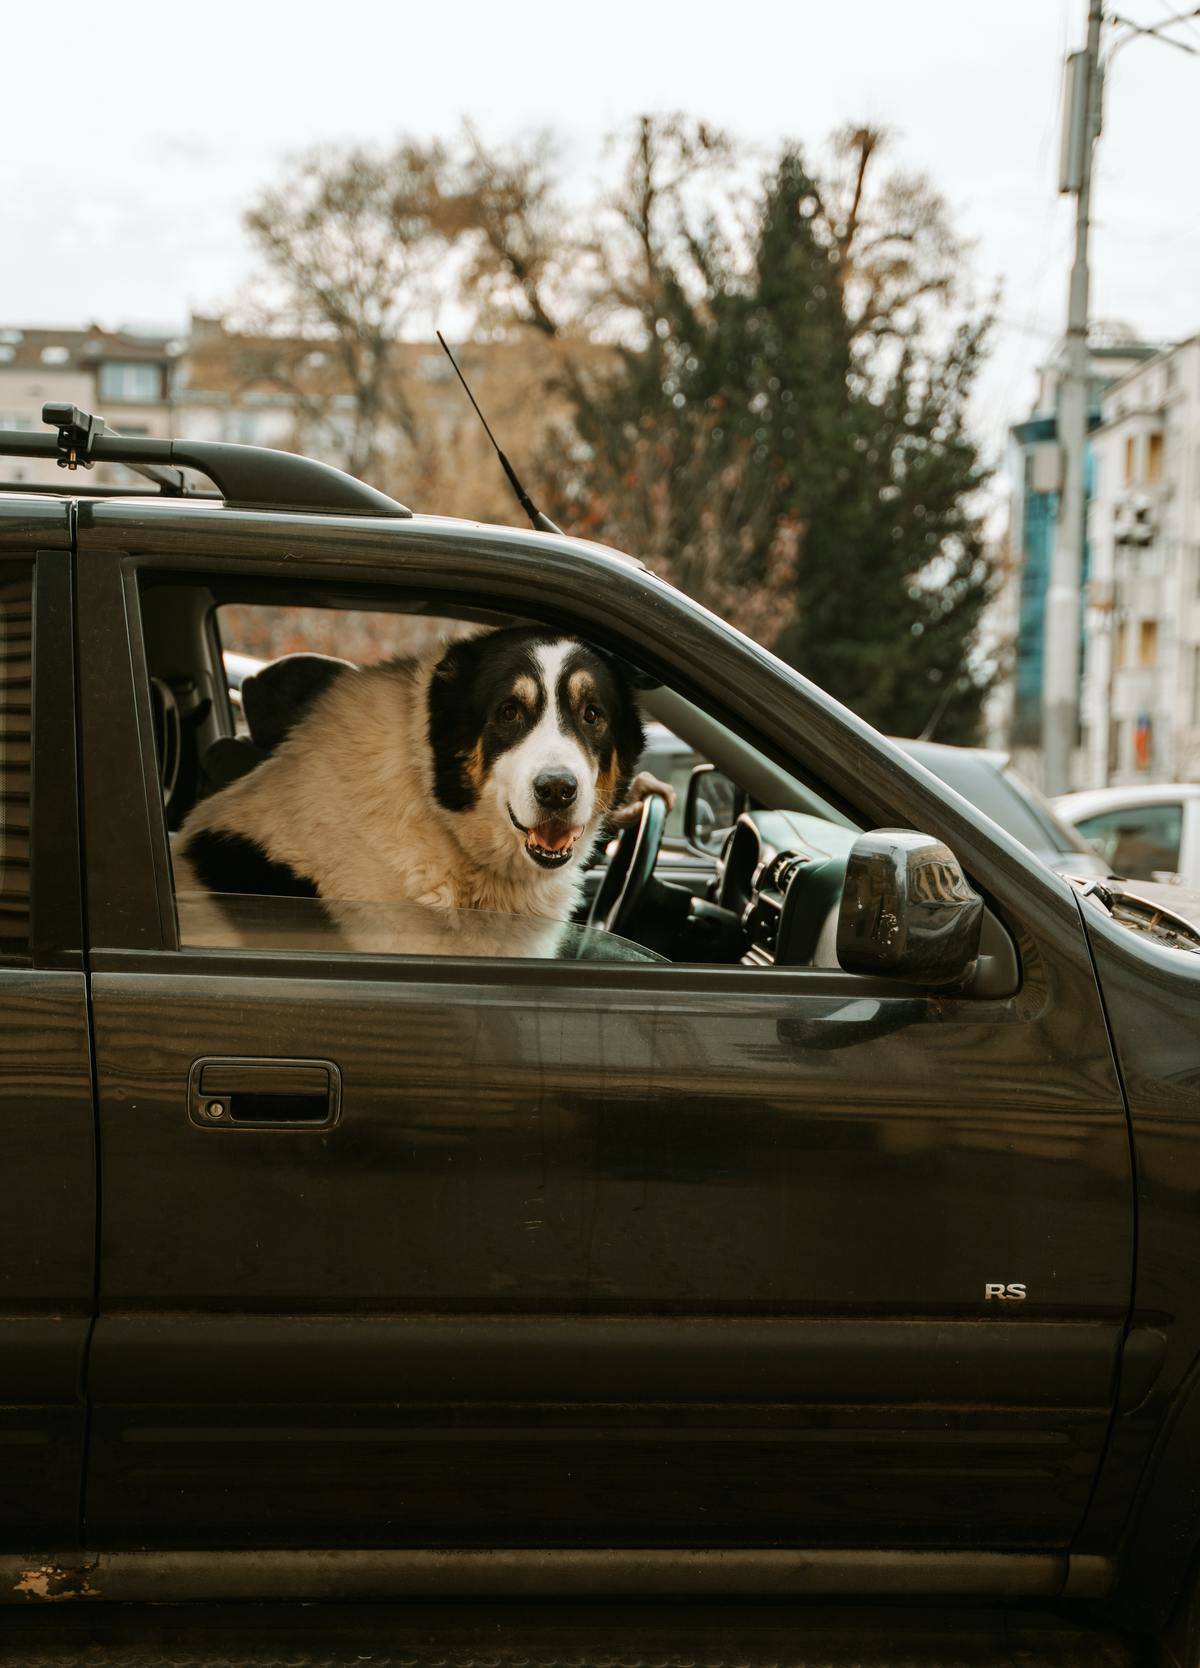 A large dog in the passenger seat of a van, looking out the open window.